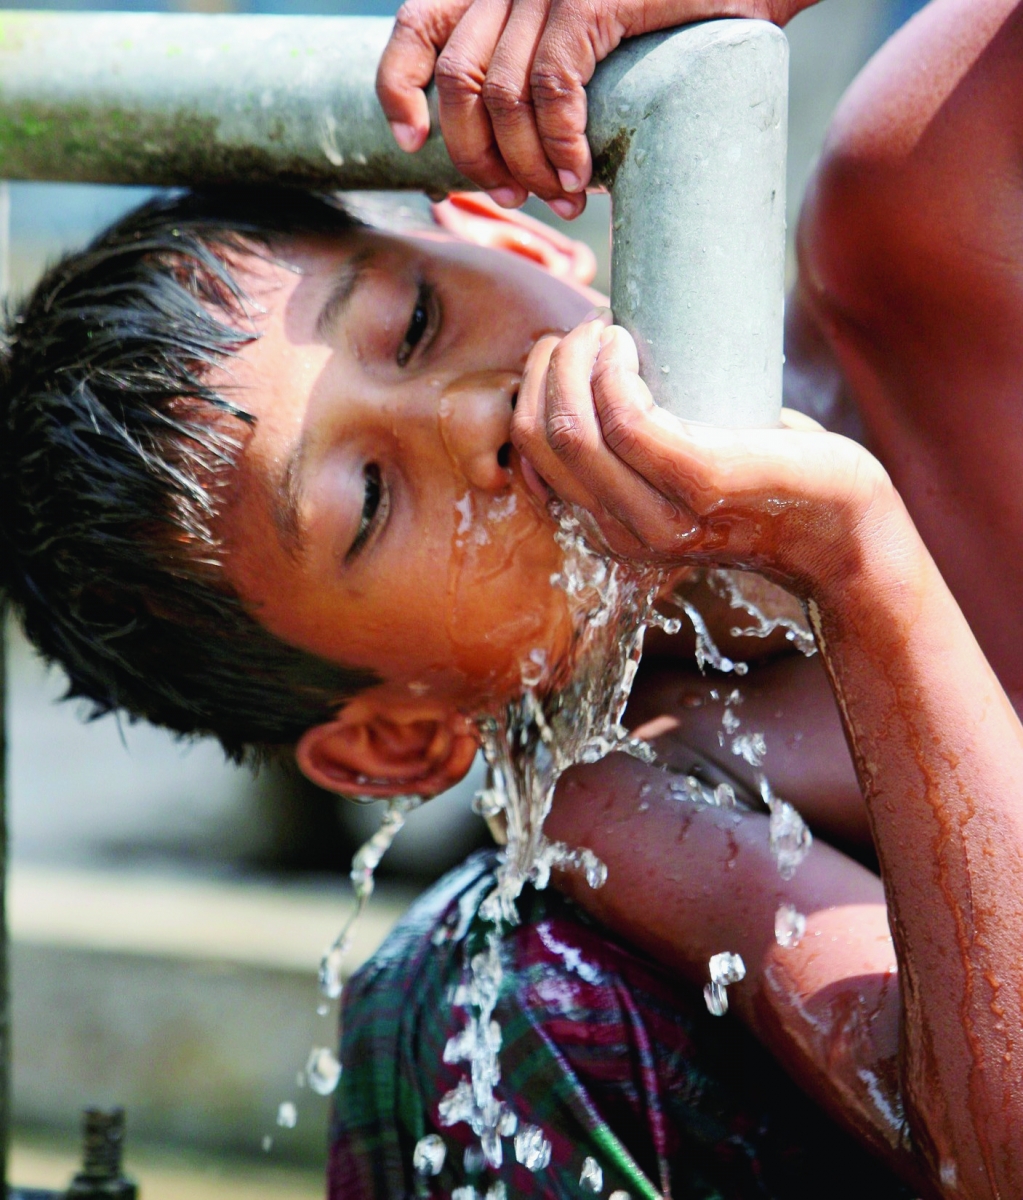 A Bangladeshi boy drinks water from a roadside water tap in Dhaka, Bangladesh, Saturday, March 21, 2009, ahead of World Water Day. There is no direct supply of potable water at homes in most of the poor neighborhoods and people have to depend on regulated supply of water from public taps erected on roadsides, with a single tap catering to hundreds of households. (AP Photo/Pavel Rahman) Bangladesh World Water Day